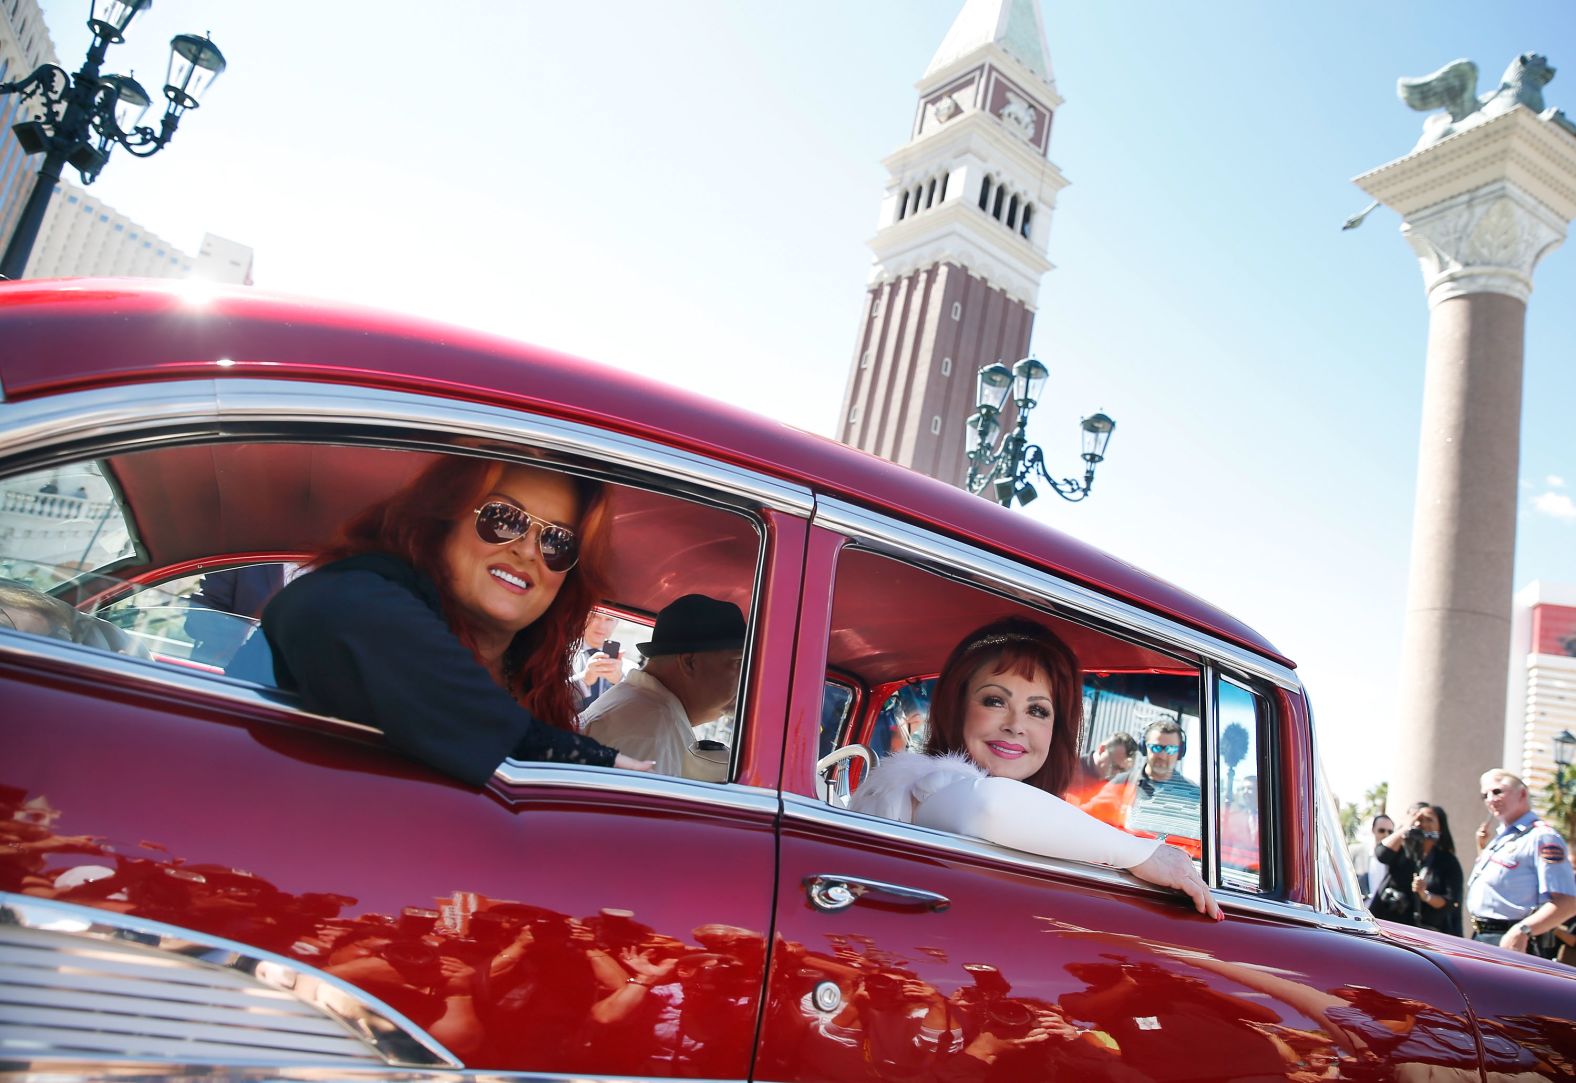 Wynonna Judd, left, and Naomi Judd arrive at The Venetian Las Vegas to launch their nine-show residency "Girls Night Out" in Las Vegas on October 6, 2015.